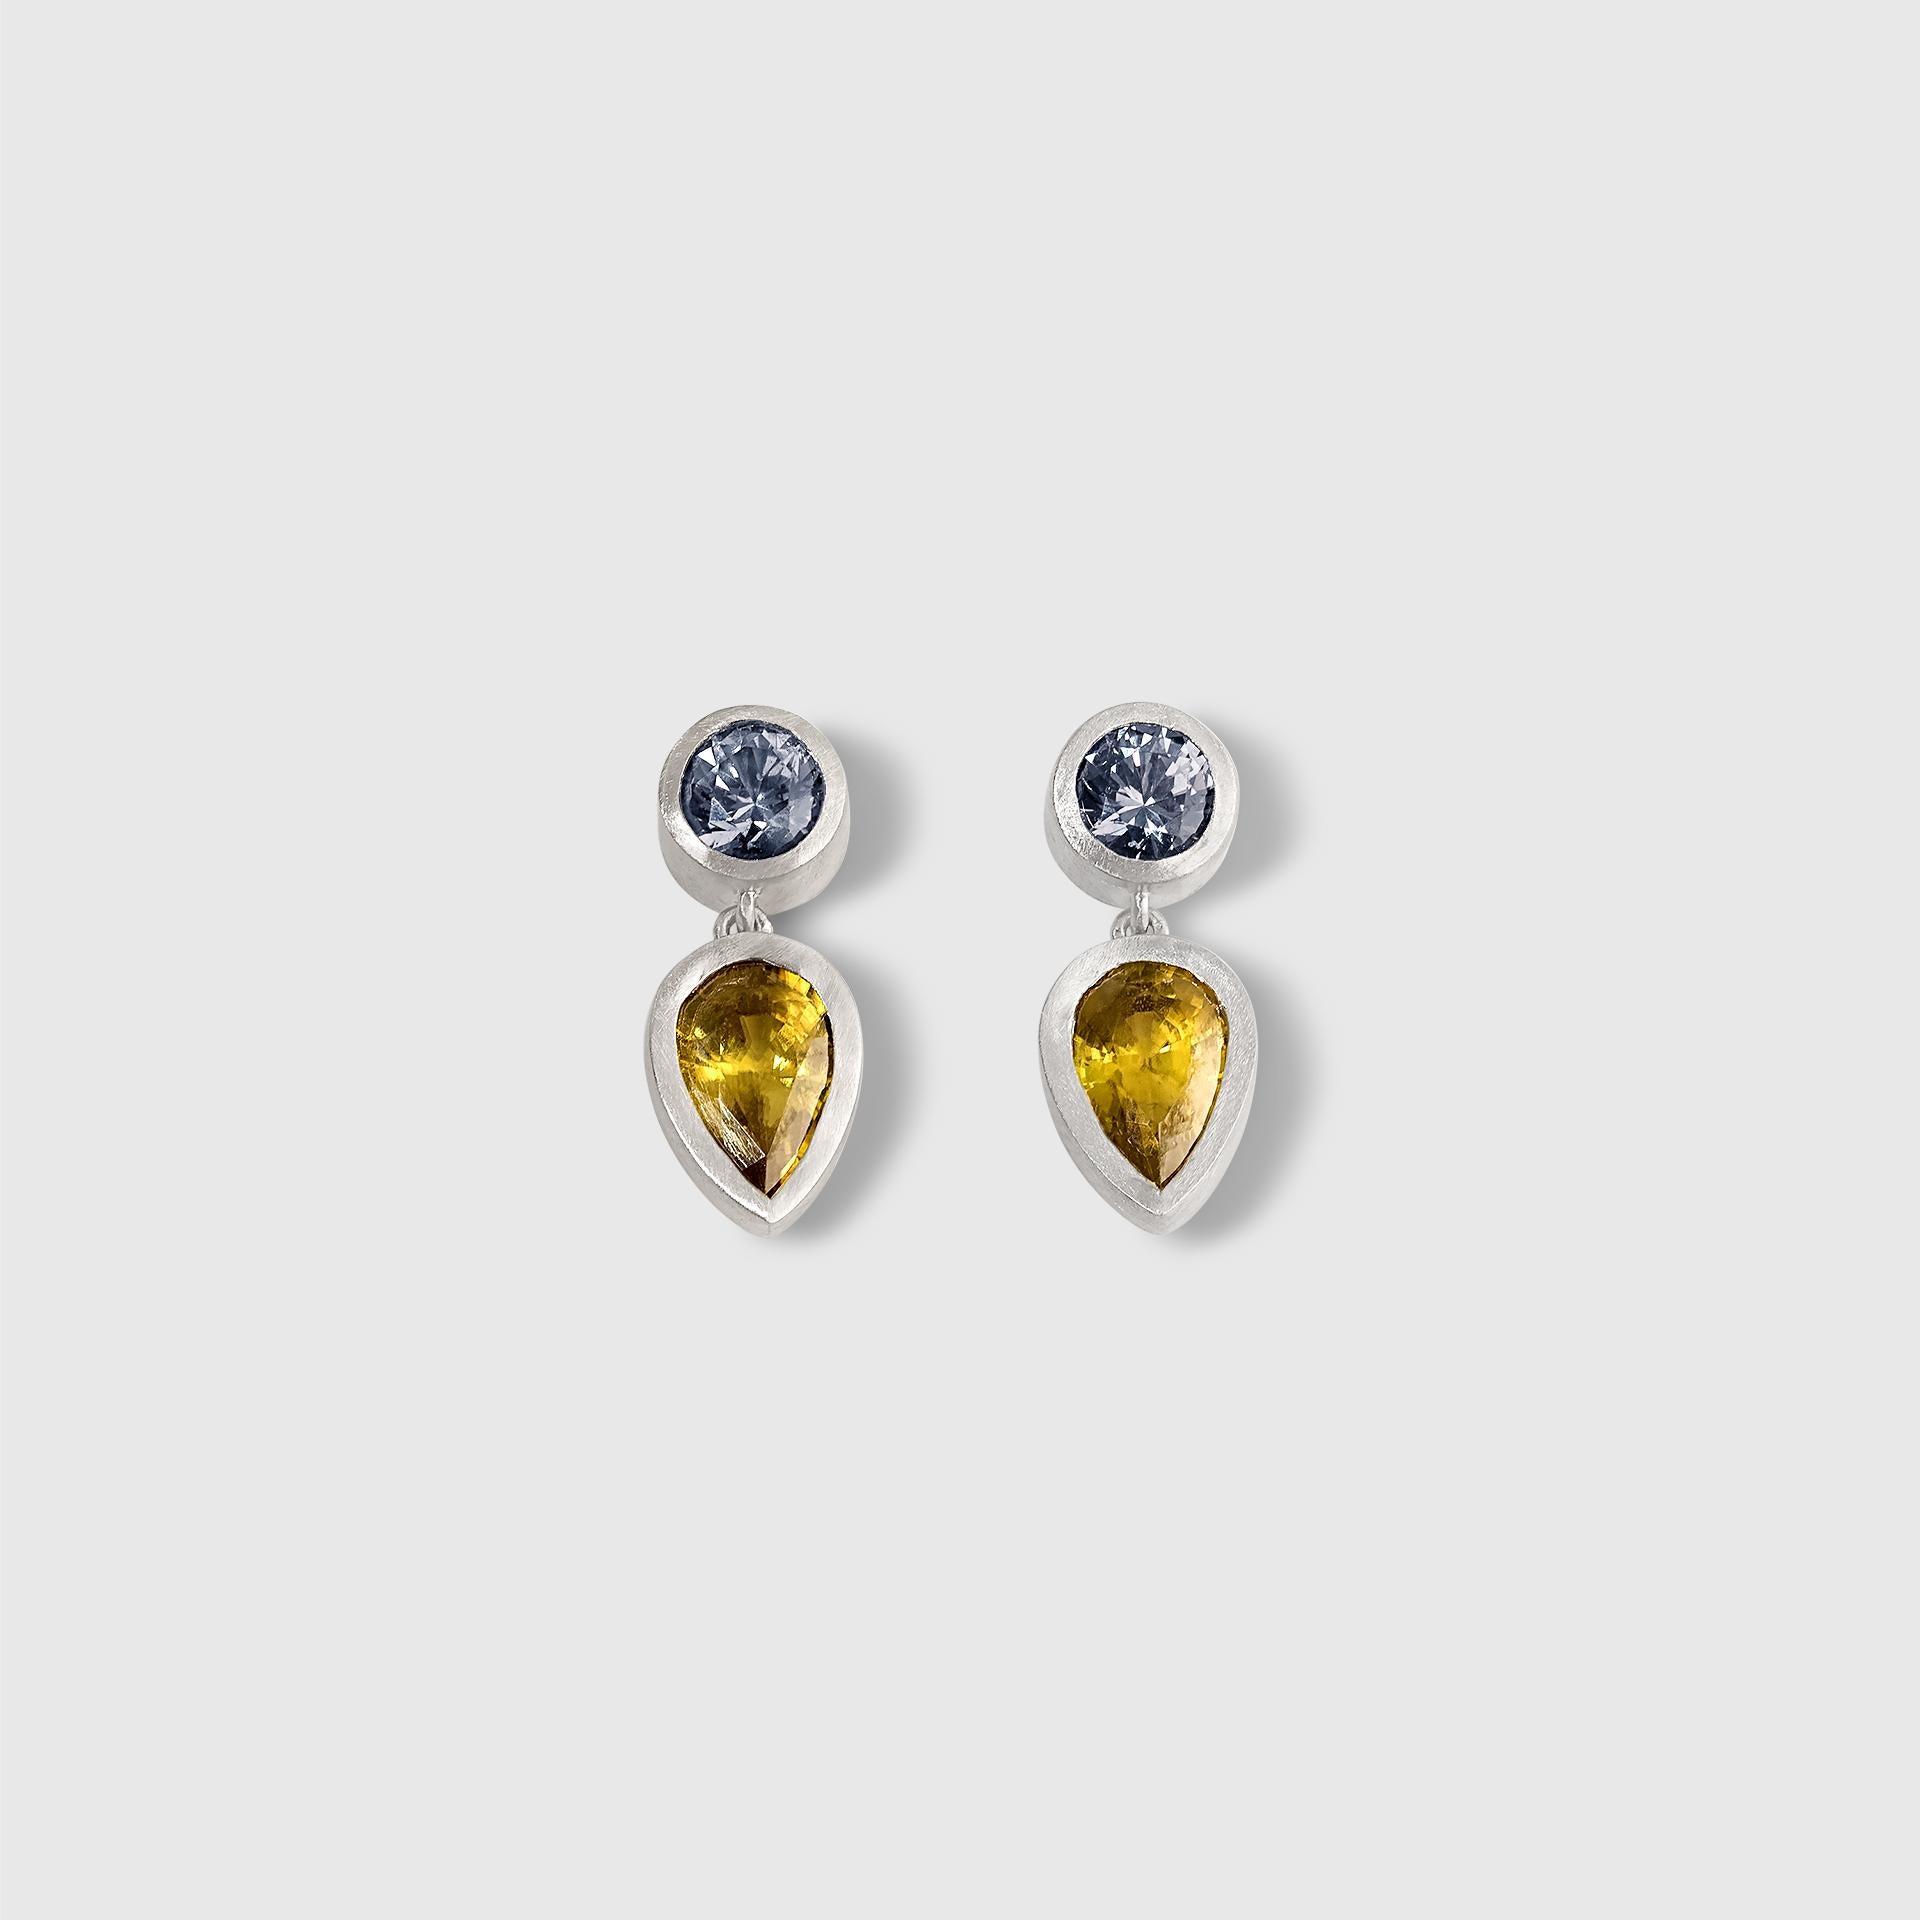 Contemporary Spring Duet Earrings, Grey Spinels & Pear Shaped Yellow Sphenes 14kt White Gold For Sale